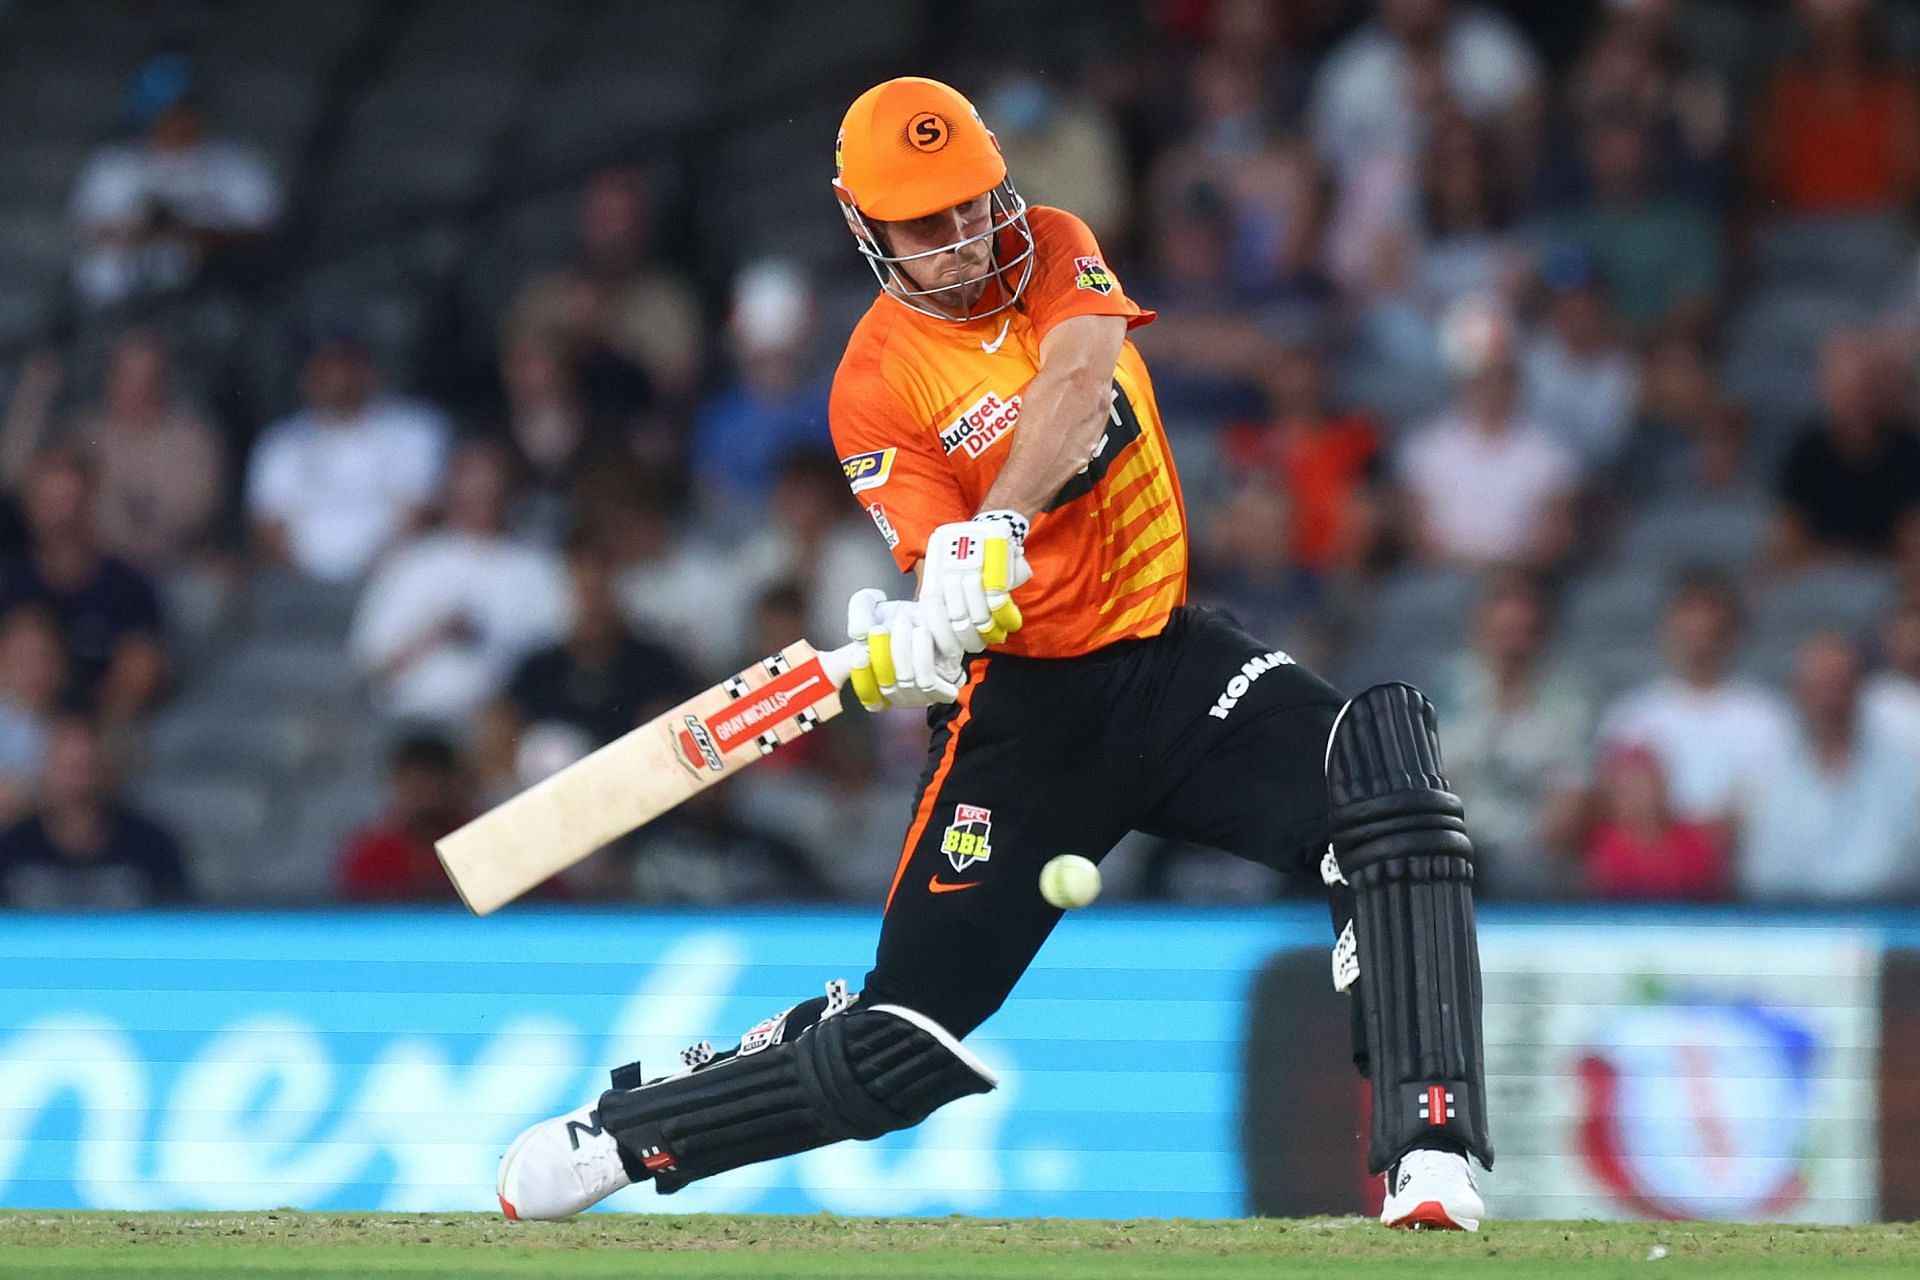 BBL - The Qualifier: Scorchers v Sixers